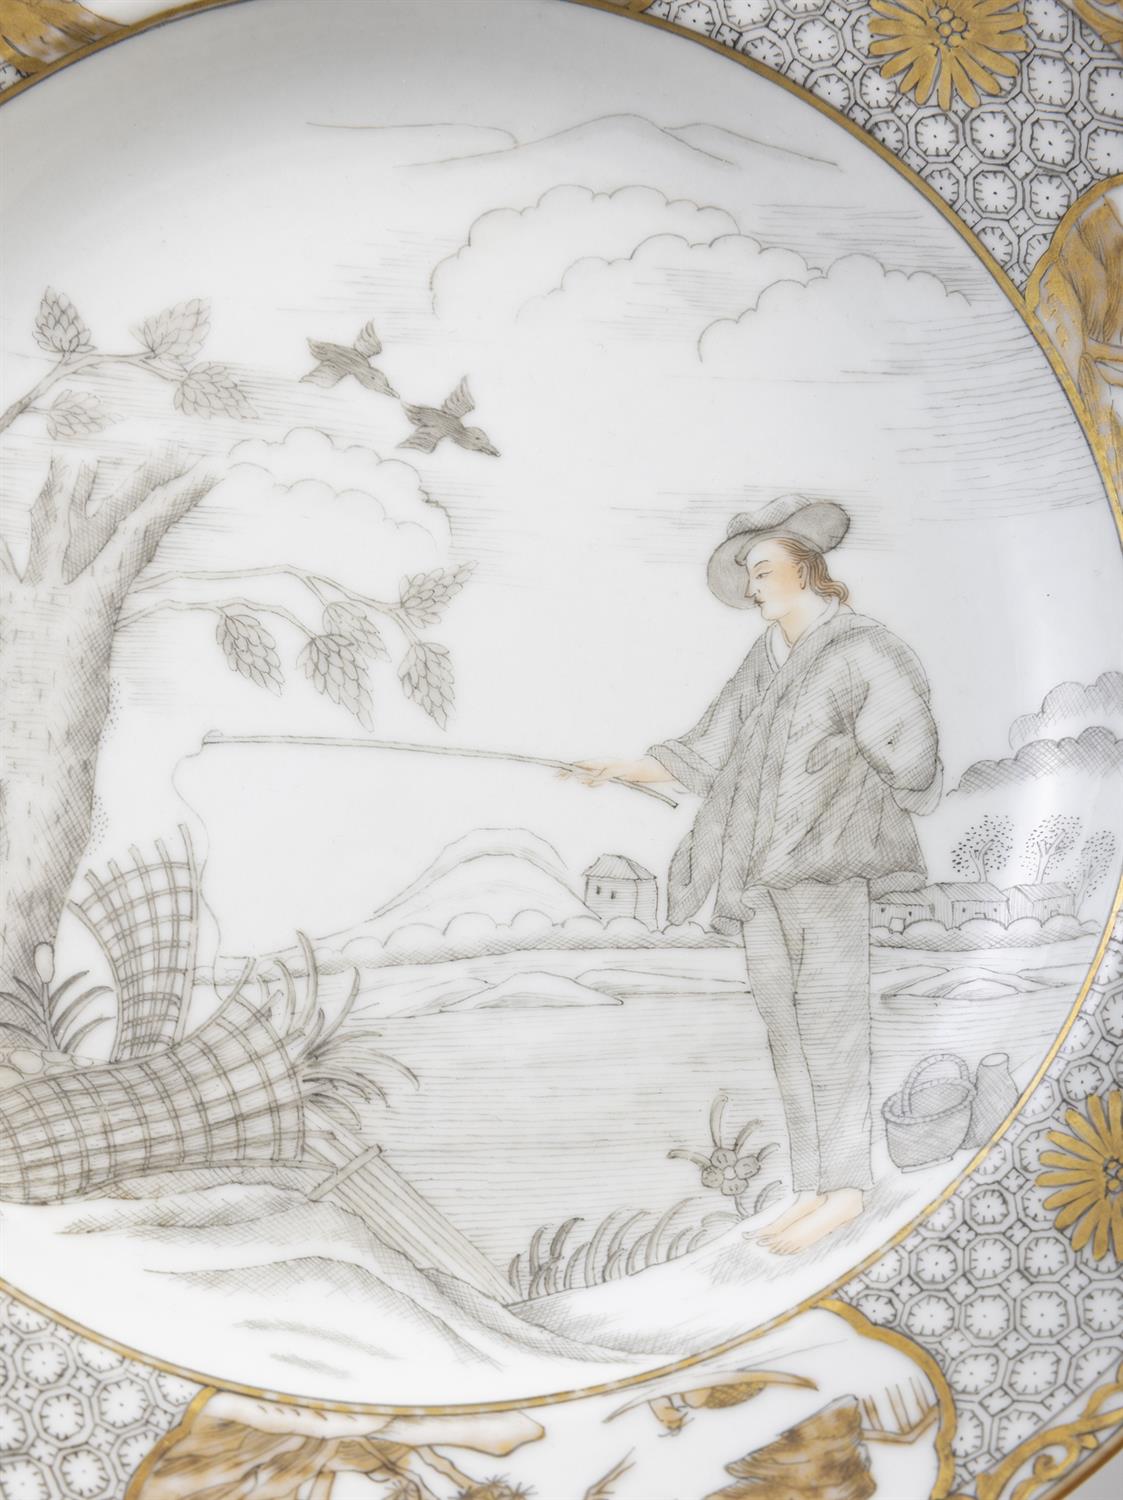 A CHINESE GRISAILLE AND GILT 'LE PECHUER' PLATE 18世紀 墨彩描金西洋人物盤 China, Companies des Indes, - Image 3 of 4